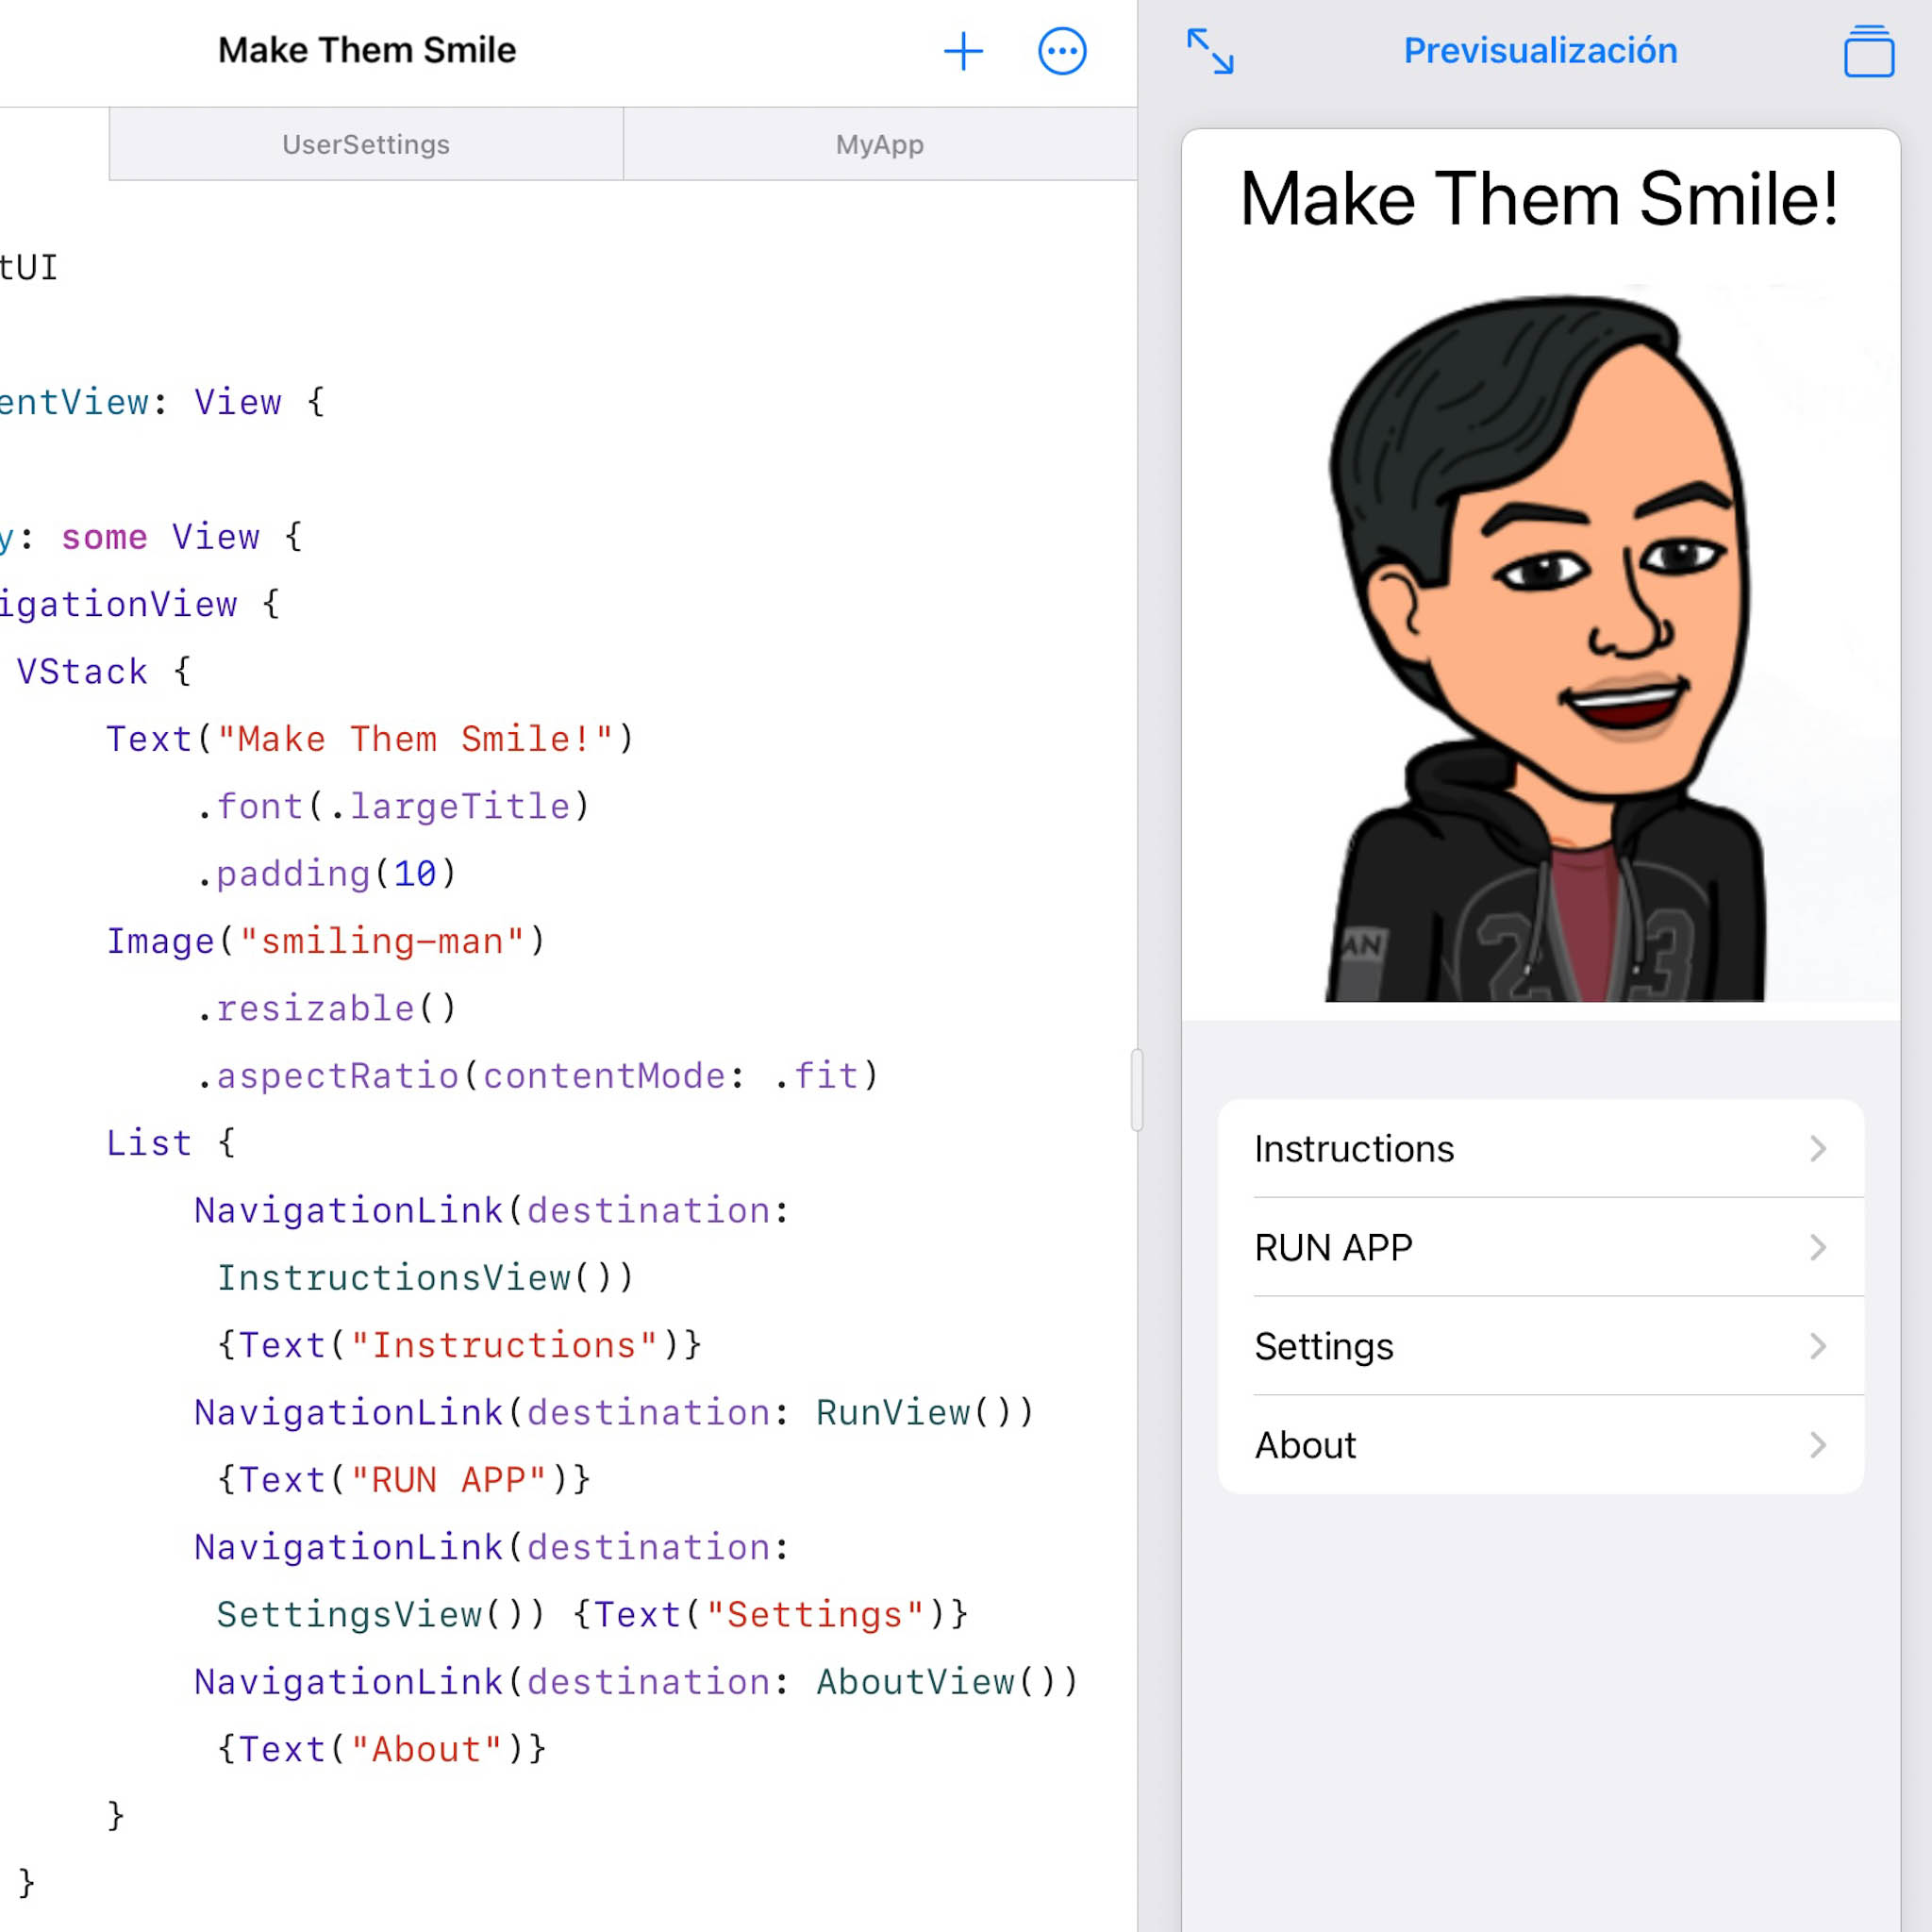 Make Them Smile!, my first attempt to make a publishable iOS app.